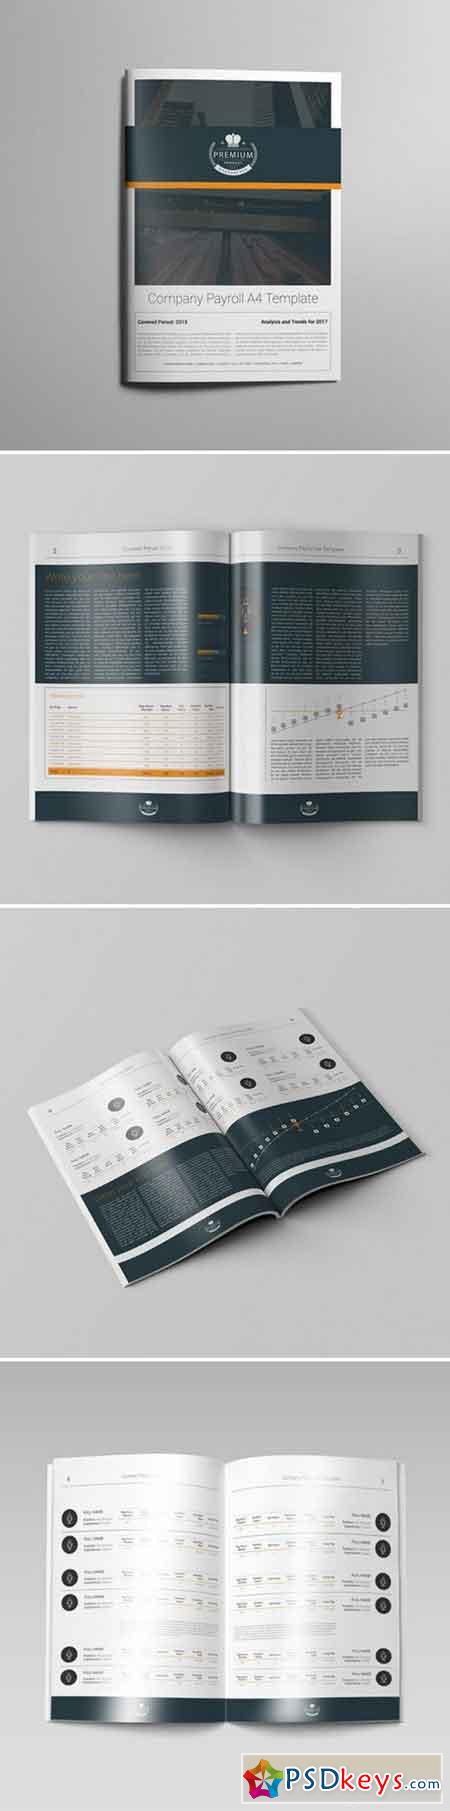 Company Payroll A4 Template 000113